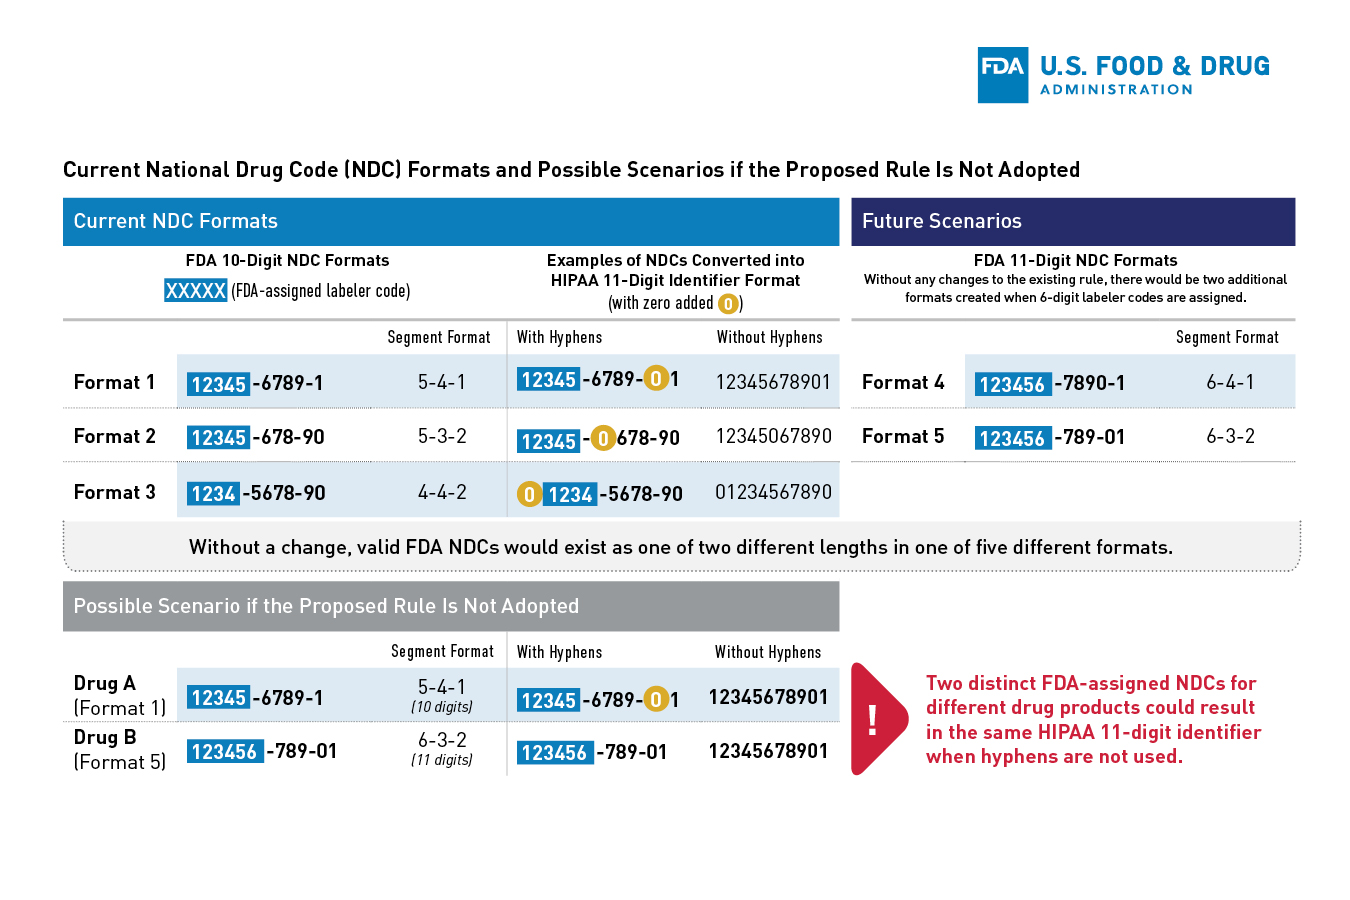 This image shows the current three formats used to create a 10 digit NDC. It also shows how an FDA NDC is converted to make a HIPAA 11 digit identifier by adding leading zeros to various segments. The graphic shows the two new FDA NDC formats that will happen if the proposed rule is not adopted. There would be five FDA NDC formats which would be 6-4-1 and  6-3-2. Additionally, the graphic notes that if the proposed rule is not adopted, there could be confusion with HIPAA identifiers with the 5-4-1 and the 6-3-2 formats. Two drugs may be assigned the same HIPAA identifier.